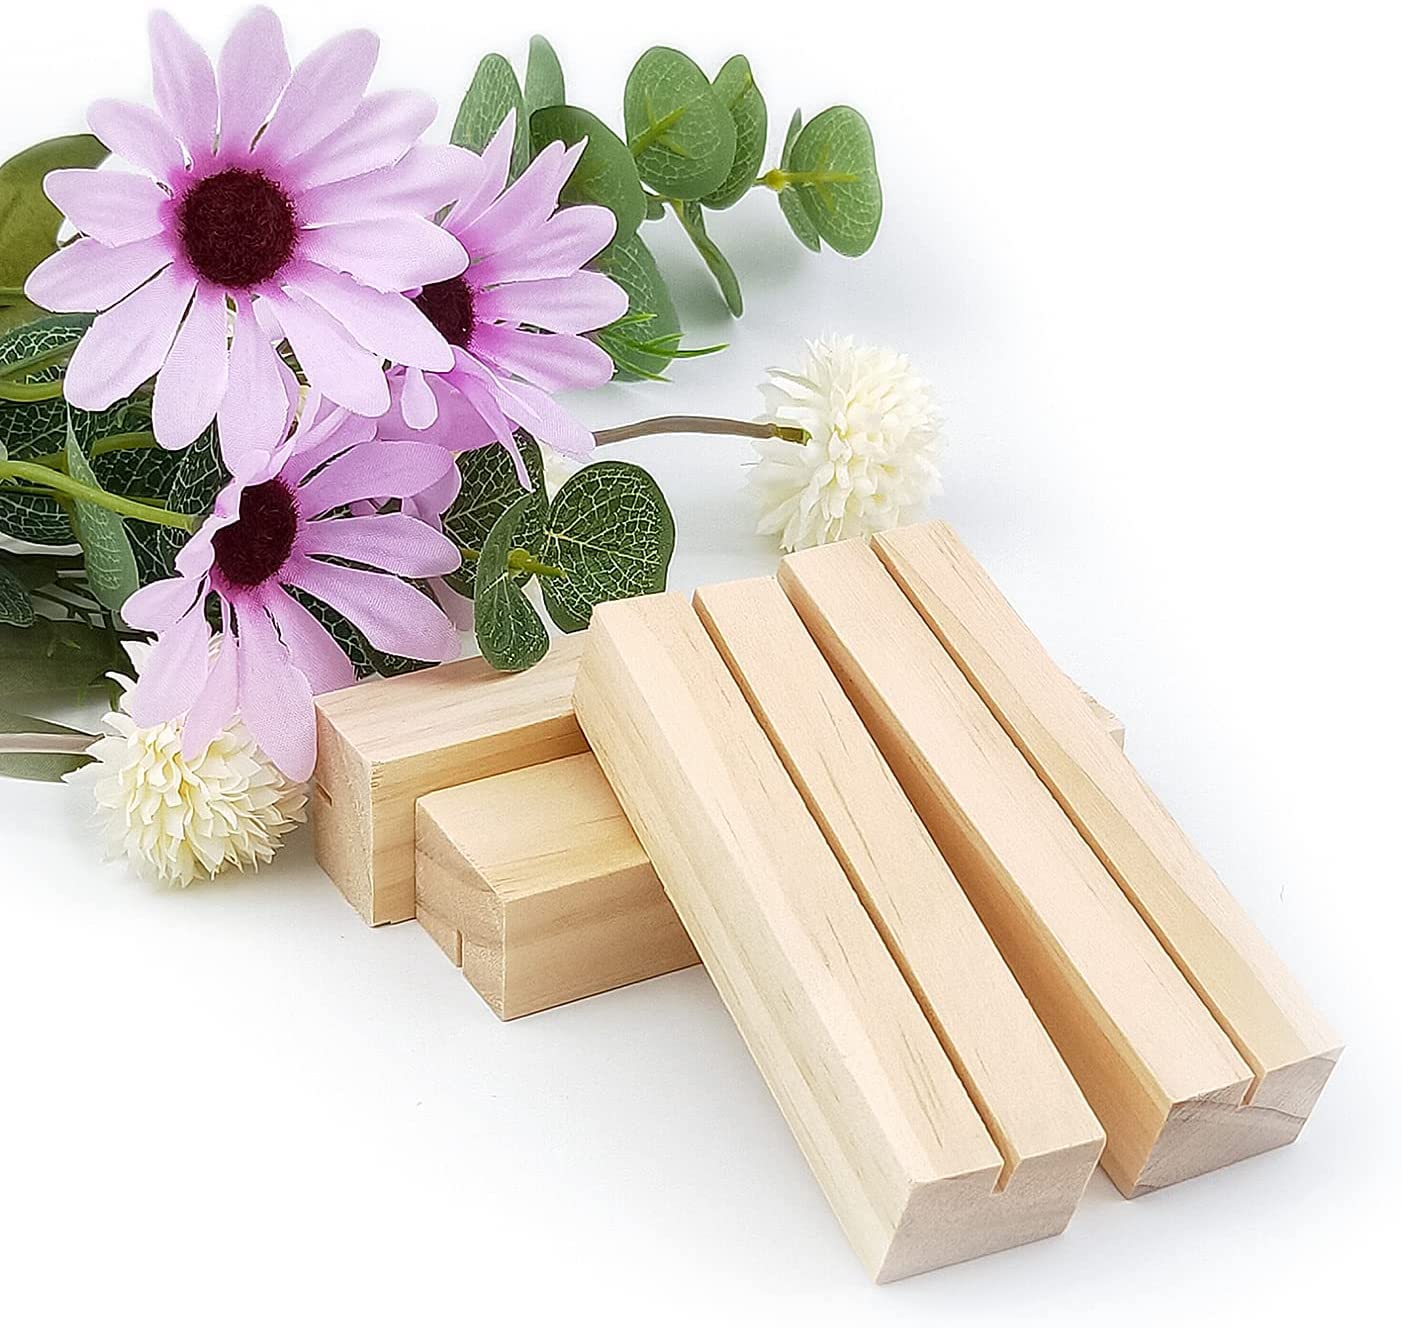 NJ Wood Card Holder Natural Beech Wood Table Number Holders, Wood Photo/picture Holders, Conference name card stand, buffet menu card holder, perfect for Hotel/home parties and conferences: 10 Pcs Set